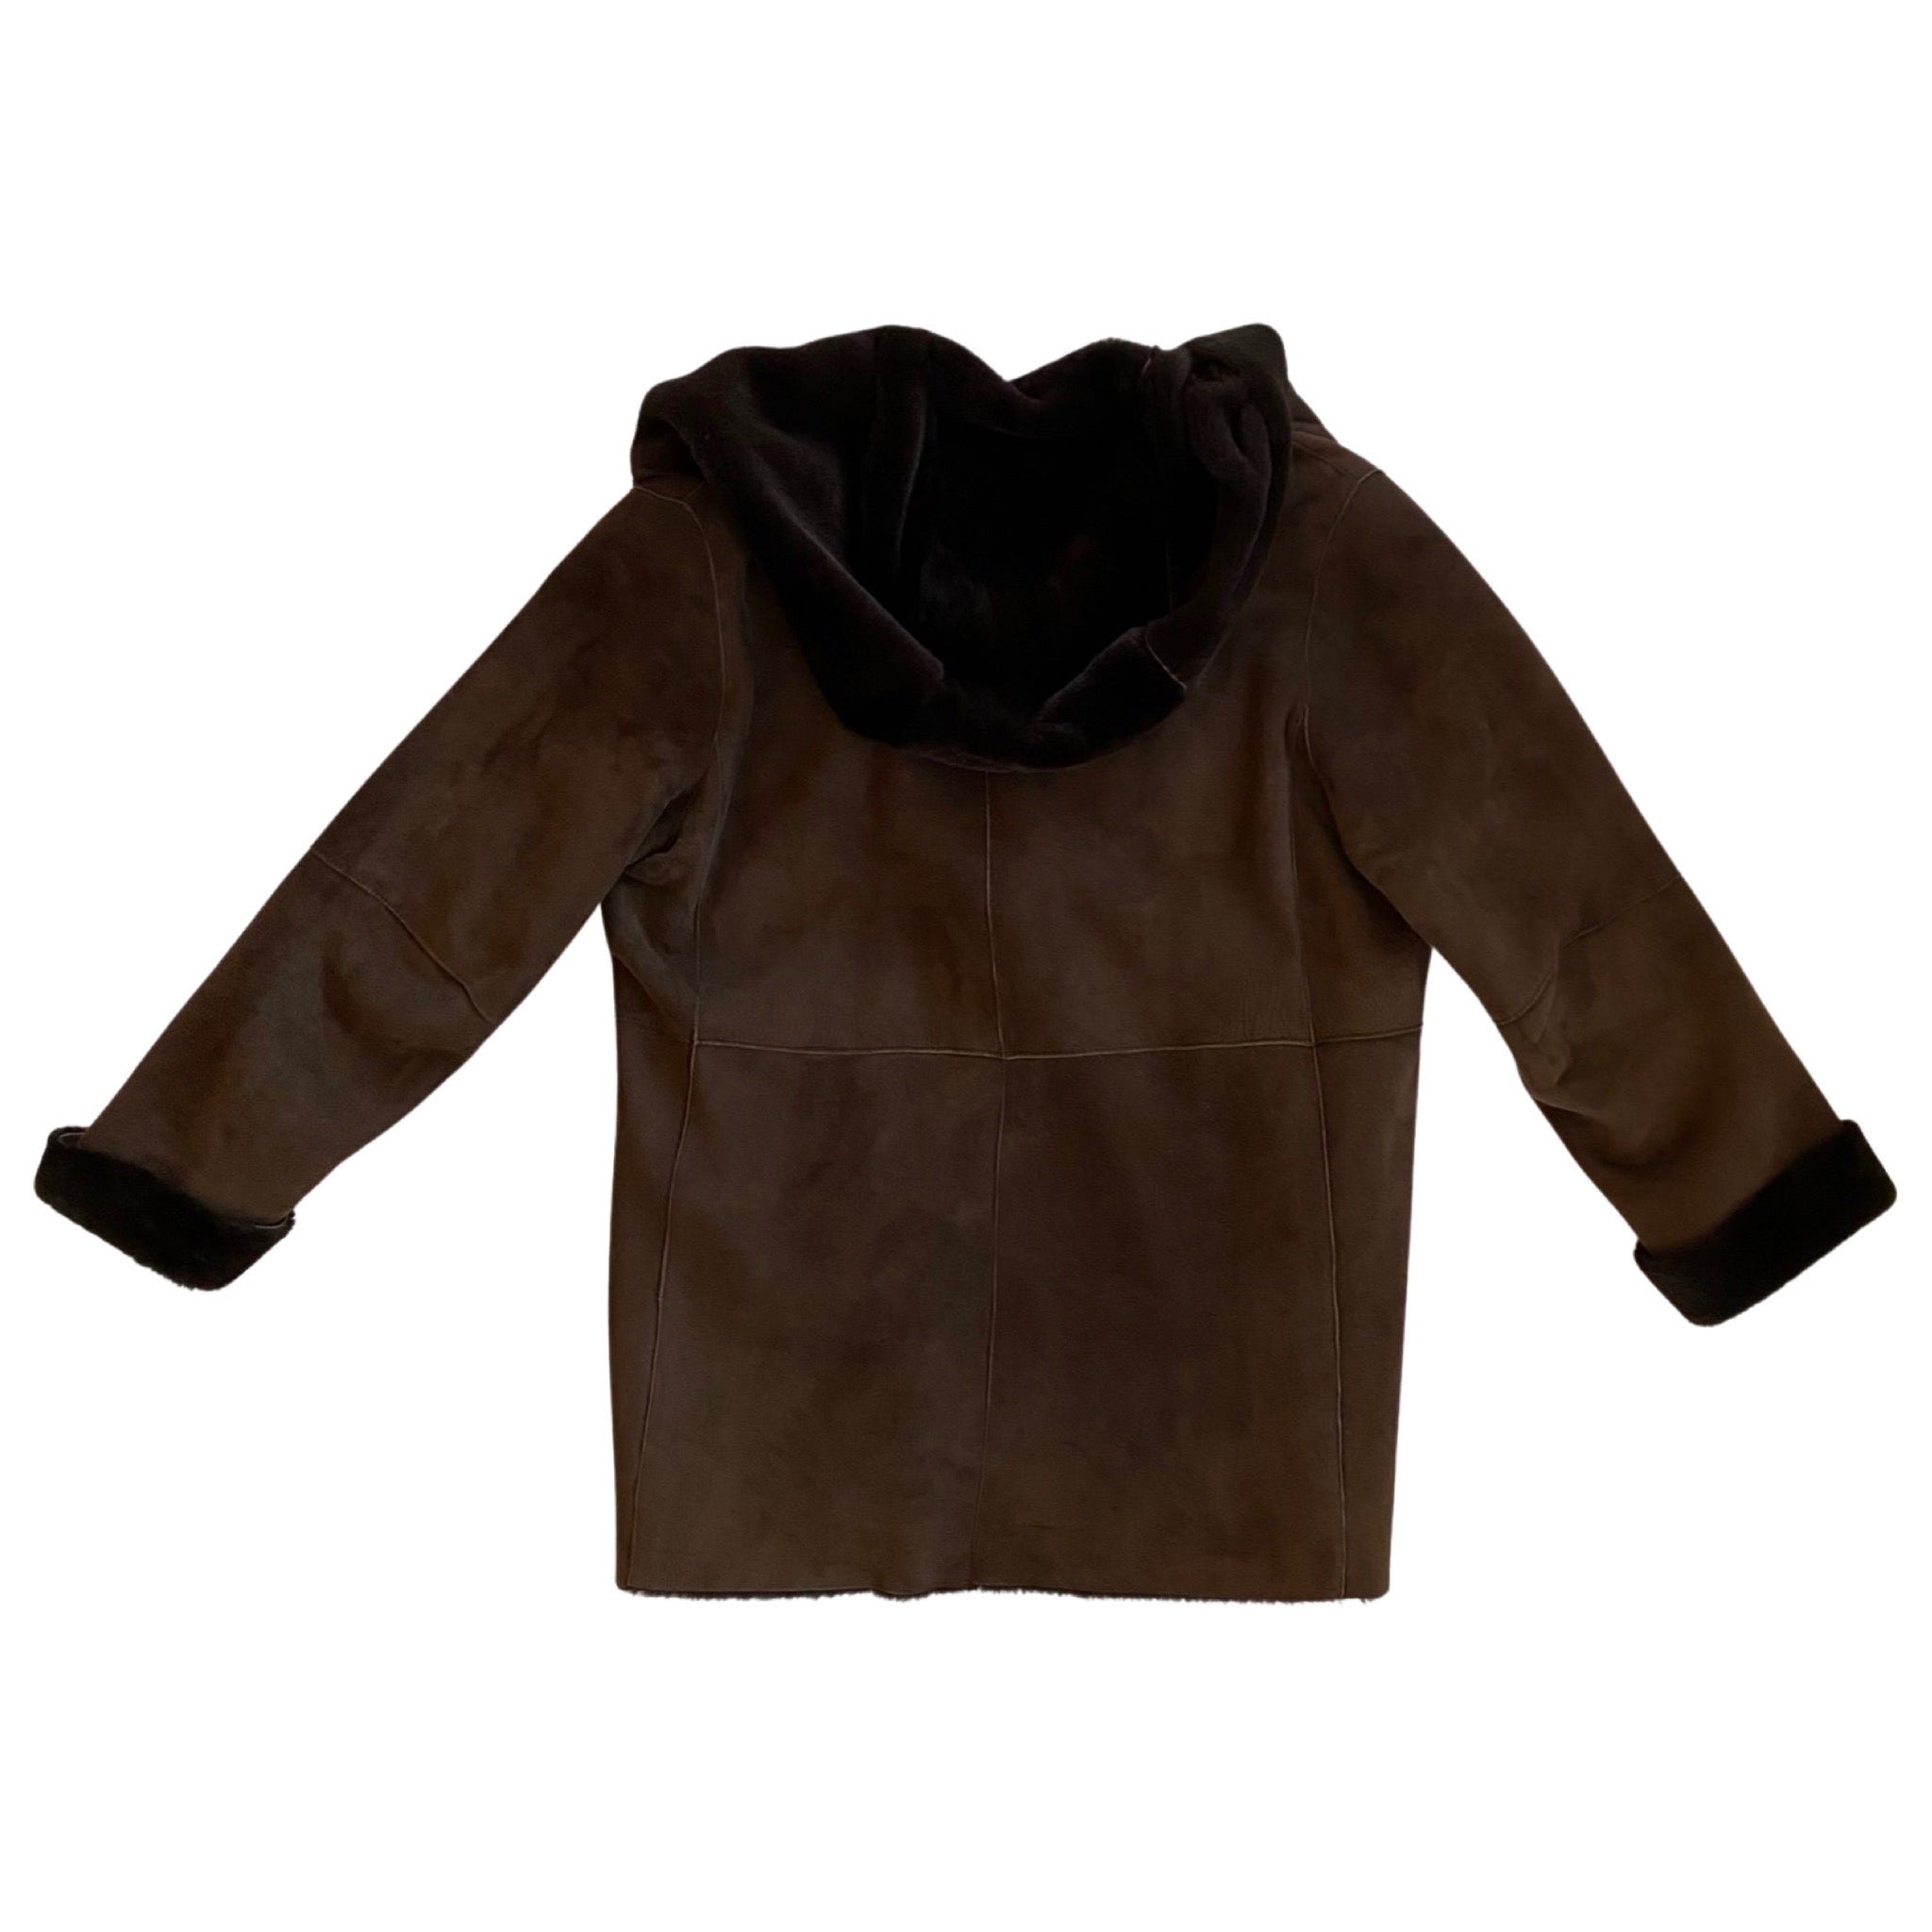 Brown Shearling Jacket with Hood